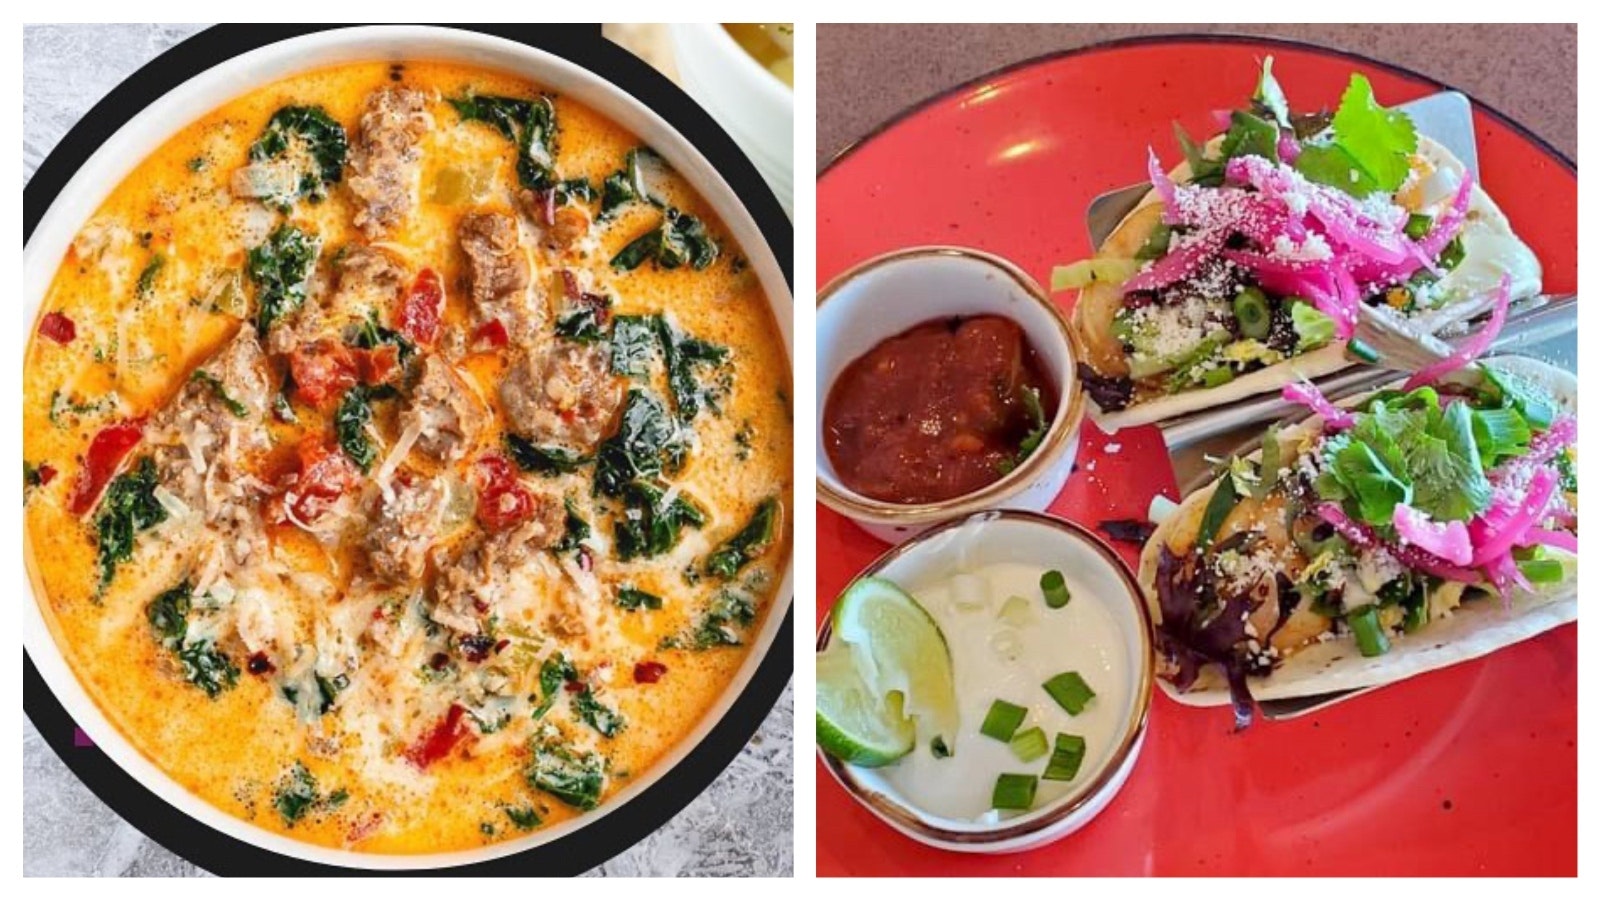 The Tuscan soup, left, which was one of the cafe's first offerings, is still one of its most popular options. Right, a variety of rotating taco options.